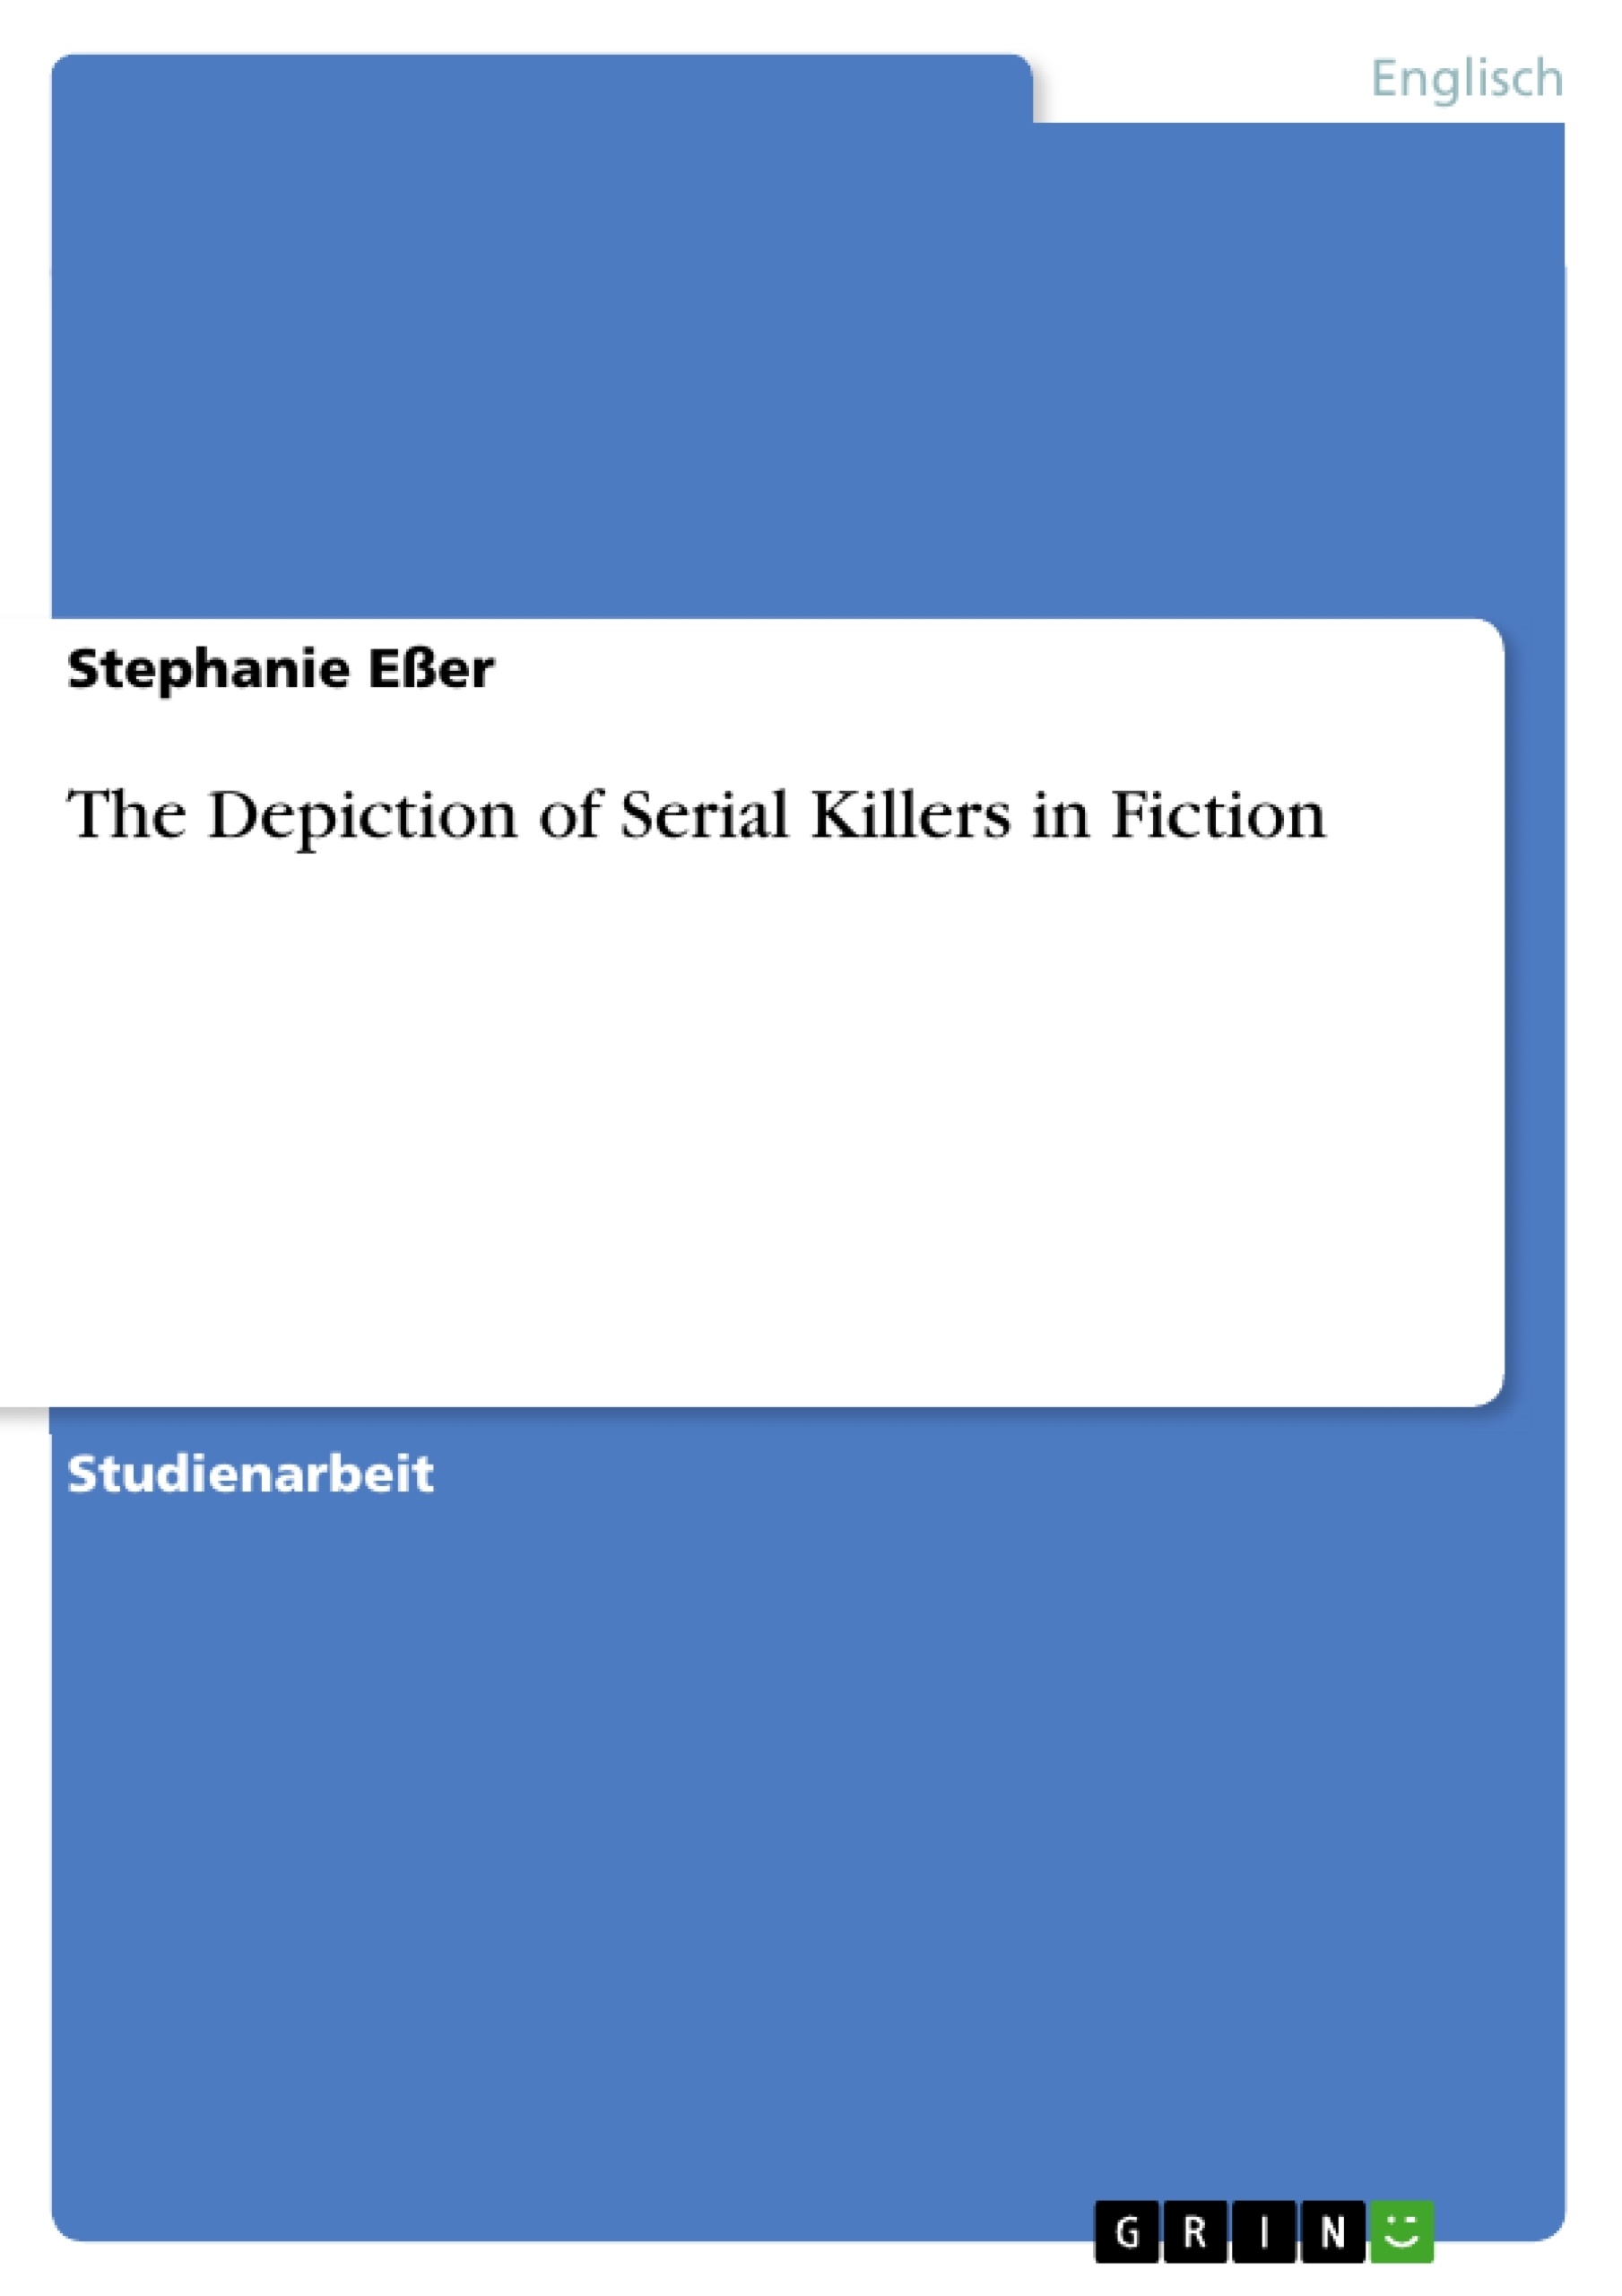 Título: The Depiction of Serial Killers in Fiction